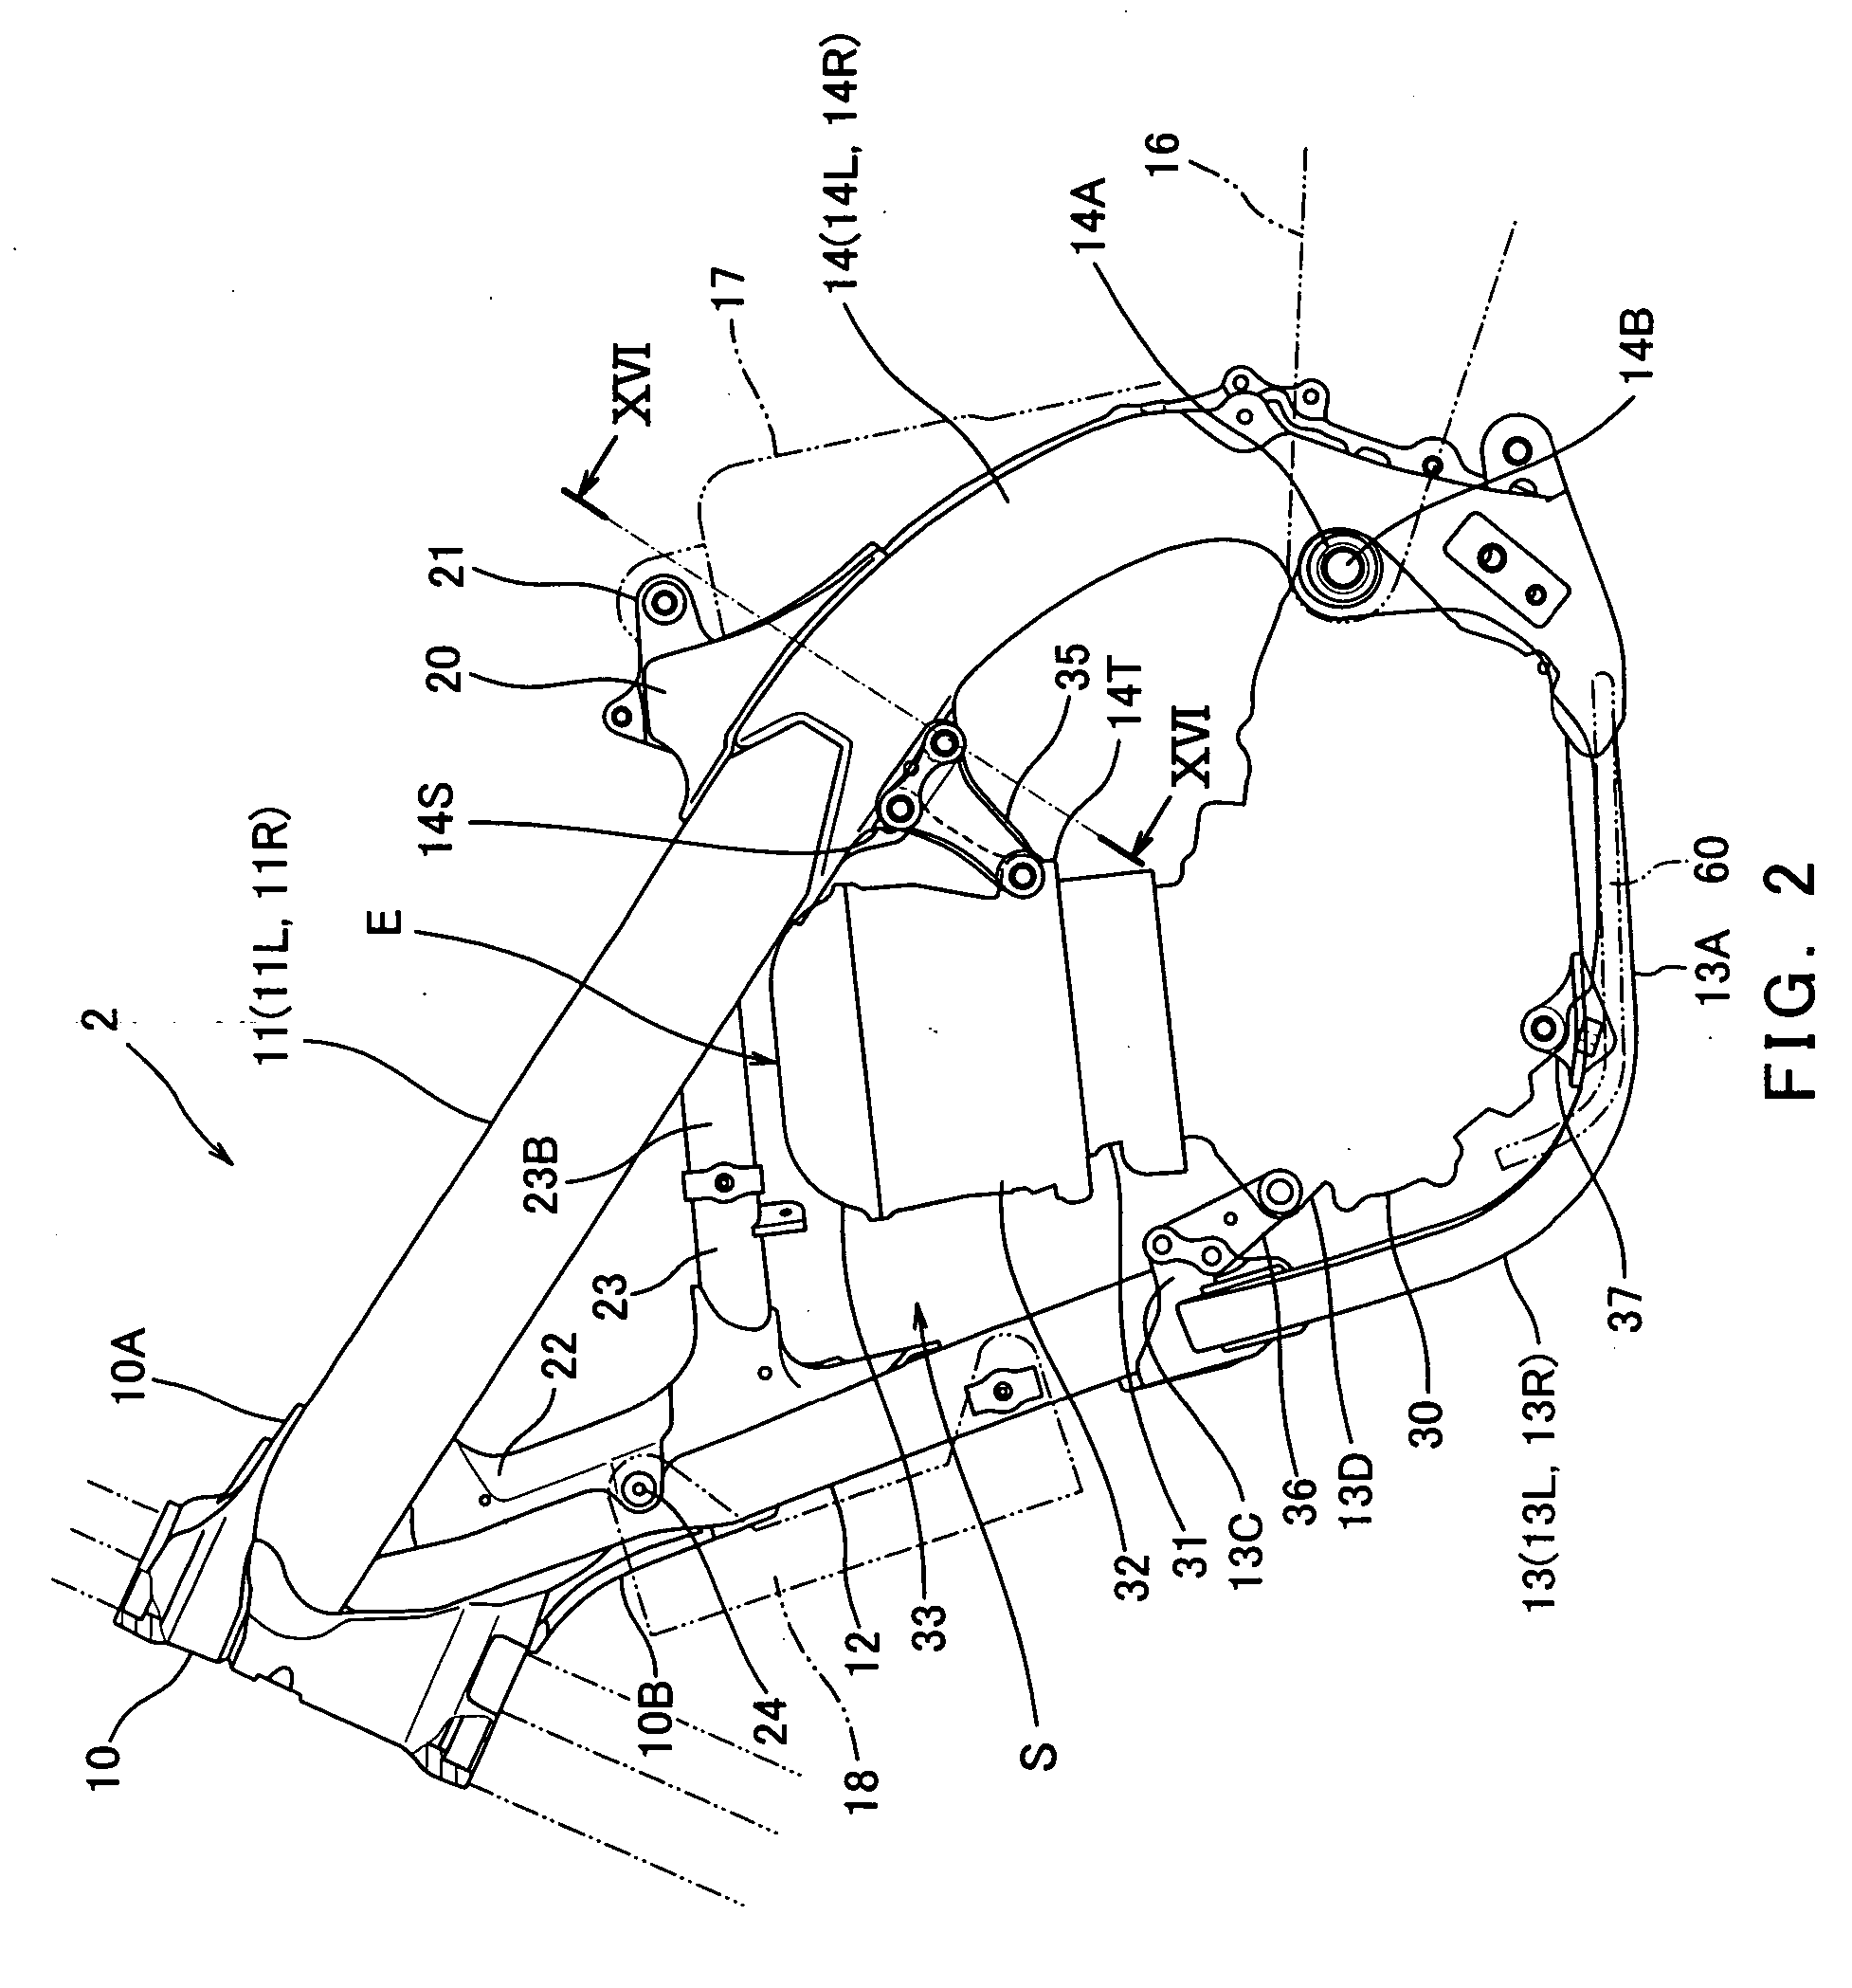 Frame of motorcycle and engine bracket